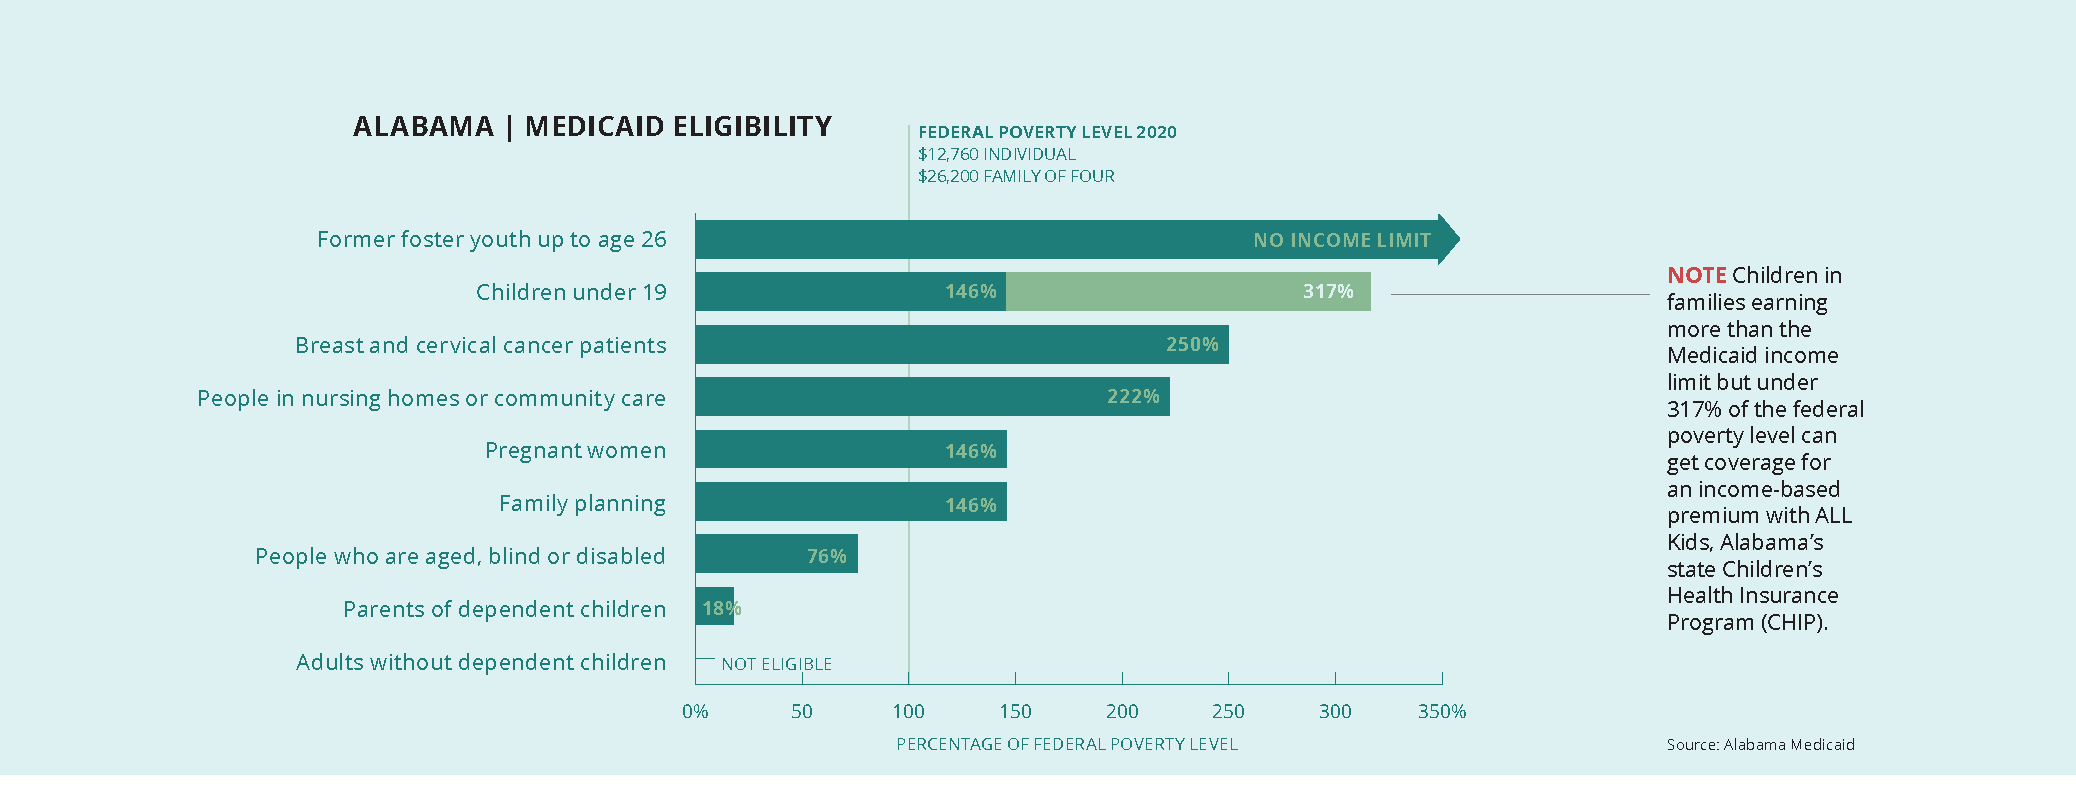 Graph showing Medicaid eligibility in Alabama. The percentage noted for each is its percentage of the federal poverty level in 2020 ($12,760 for an individual and $26,200 for a family of four). Former foster youth up to age 26 (no income limit), Children under 19 (146% - Note: Children in families earning more than the Medicaid income limit but under 317% of the federal poverty level can get coverage for an income-based premium with ALL Kids, Alabama's state Children's Health Insurance Program (CHIP)), Breast and cervical cancer patients (250%), People in nursing homes or community care (222%), Pregnant women (146%), Family planning (146%), People who are aged, blind or disabled (76%), Parents of dependent children (18%) and adults without dependent children (not eligible). Source: Alabama Medicaid